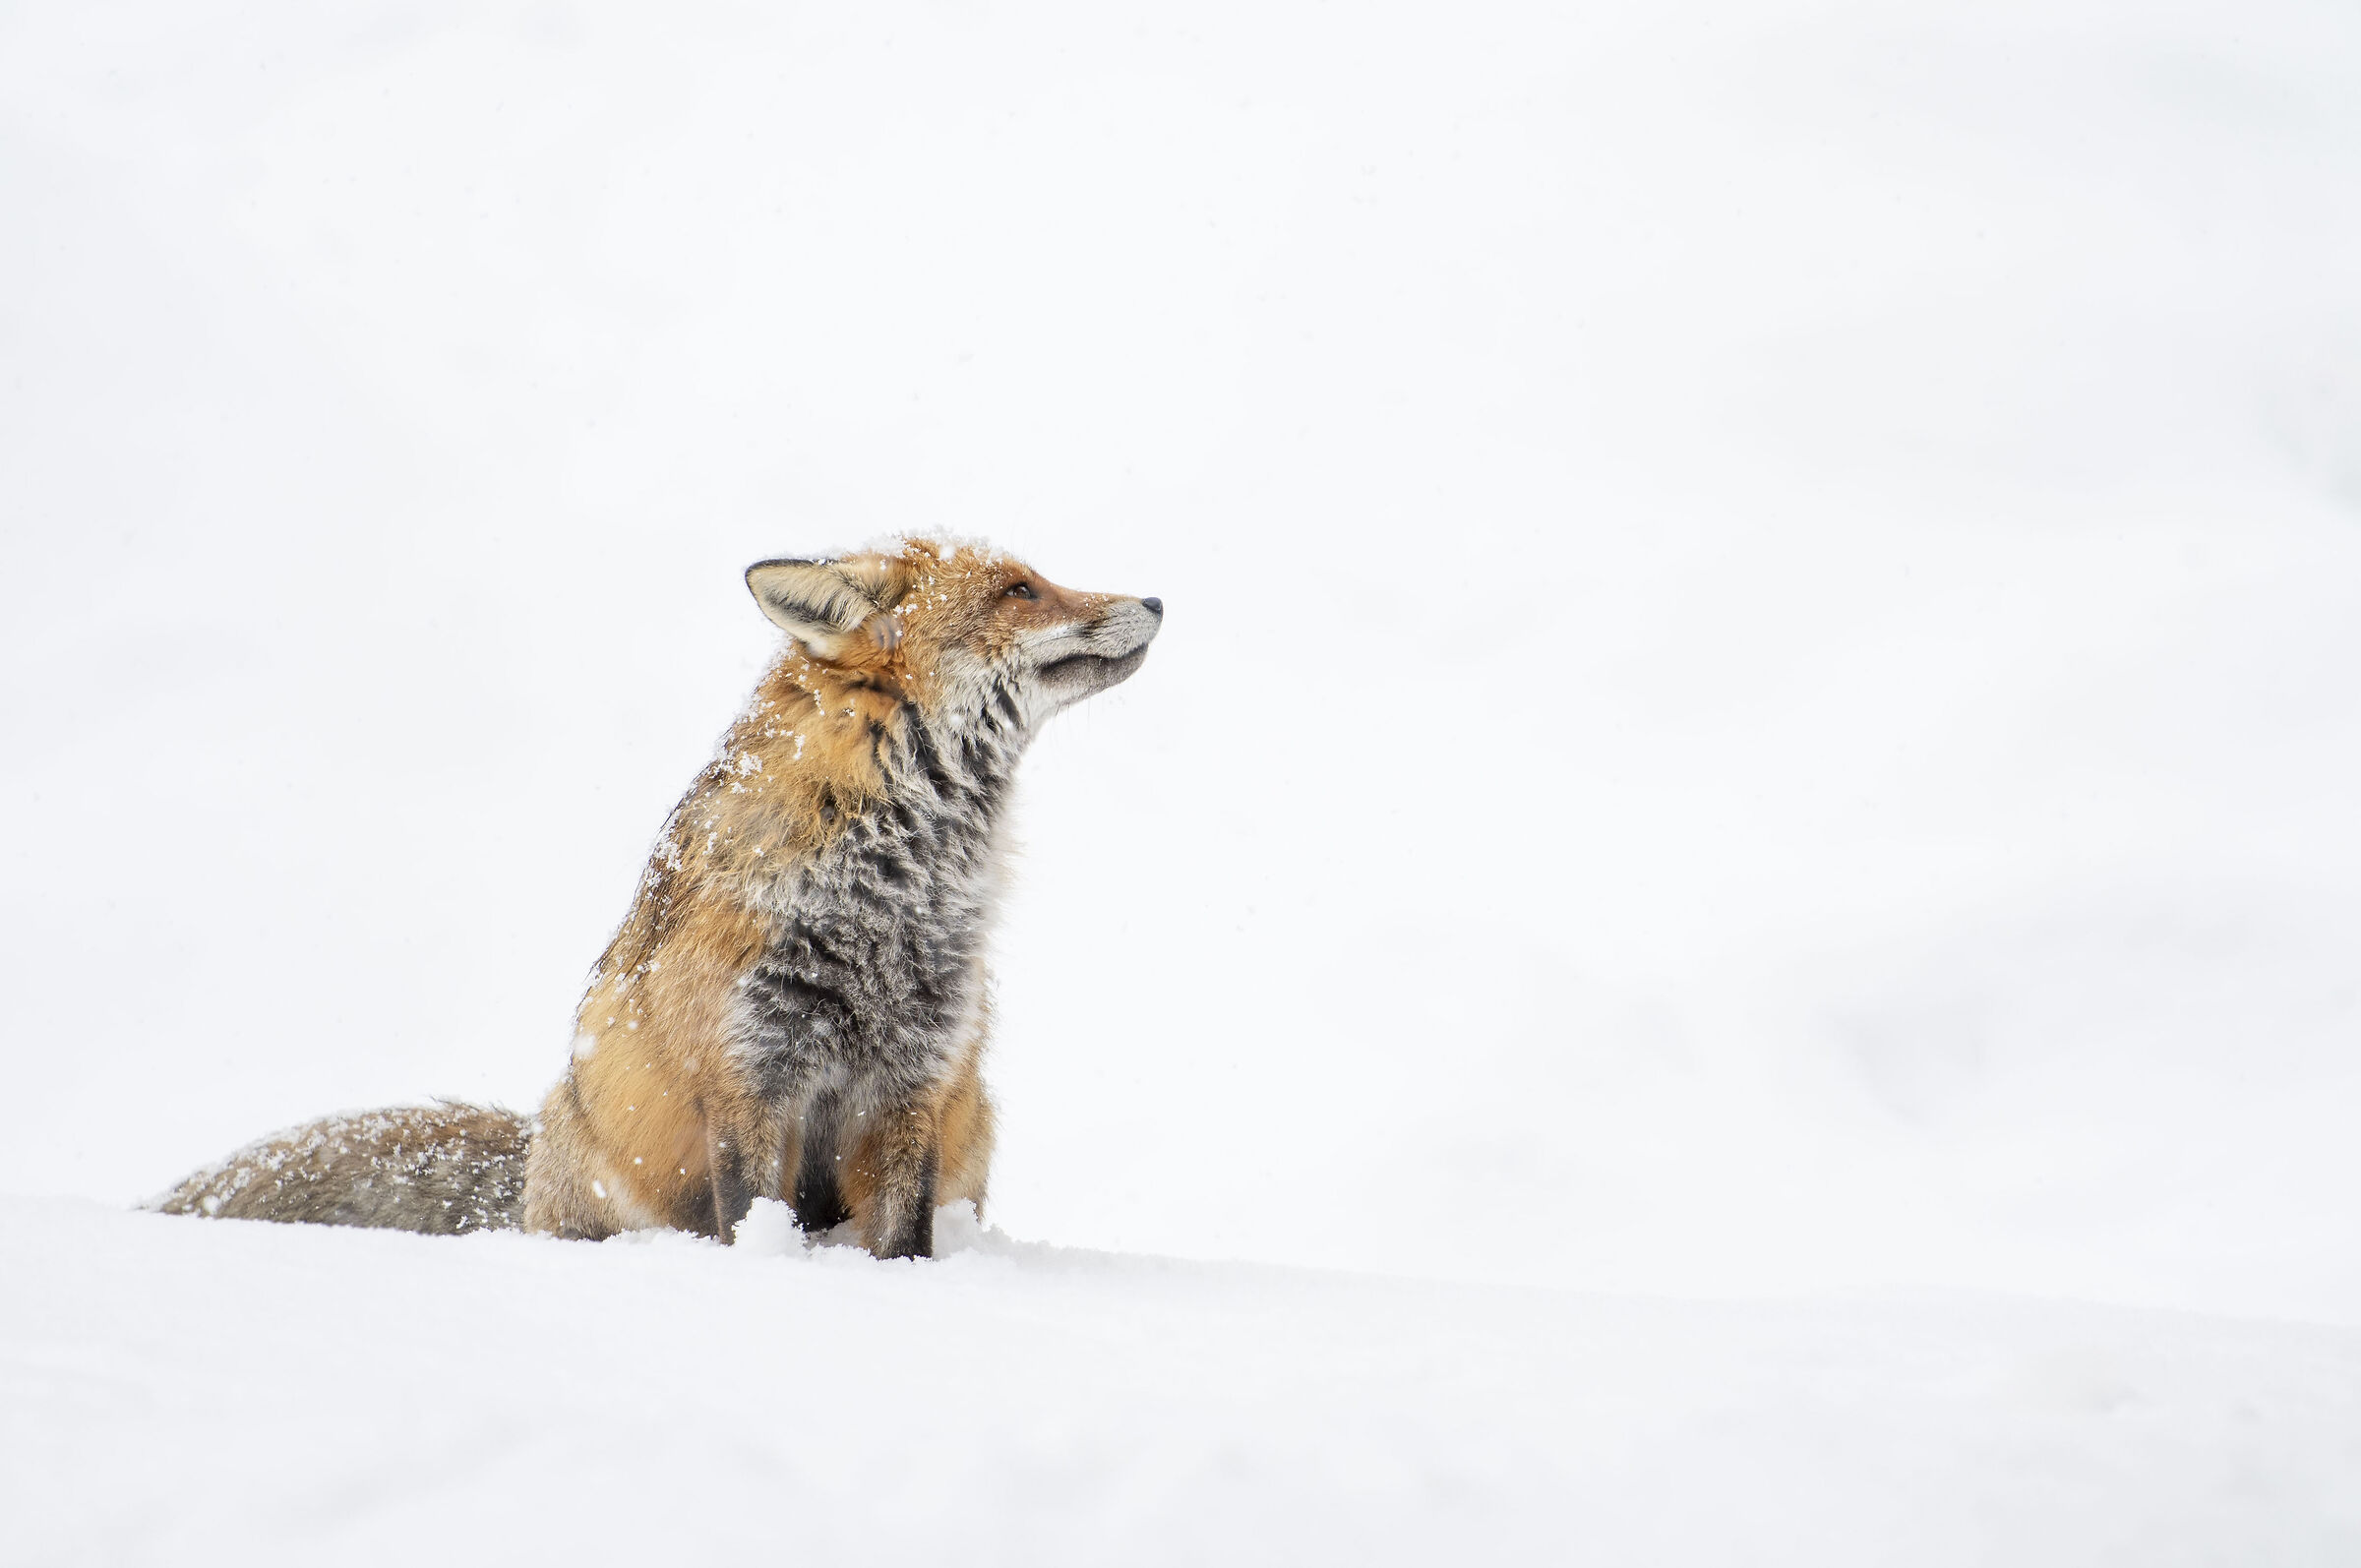 The Fox and the Snow...